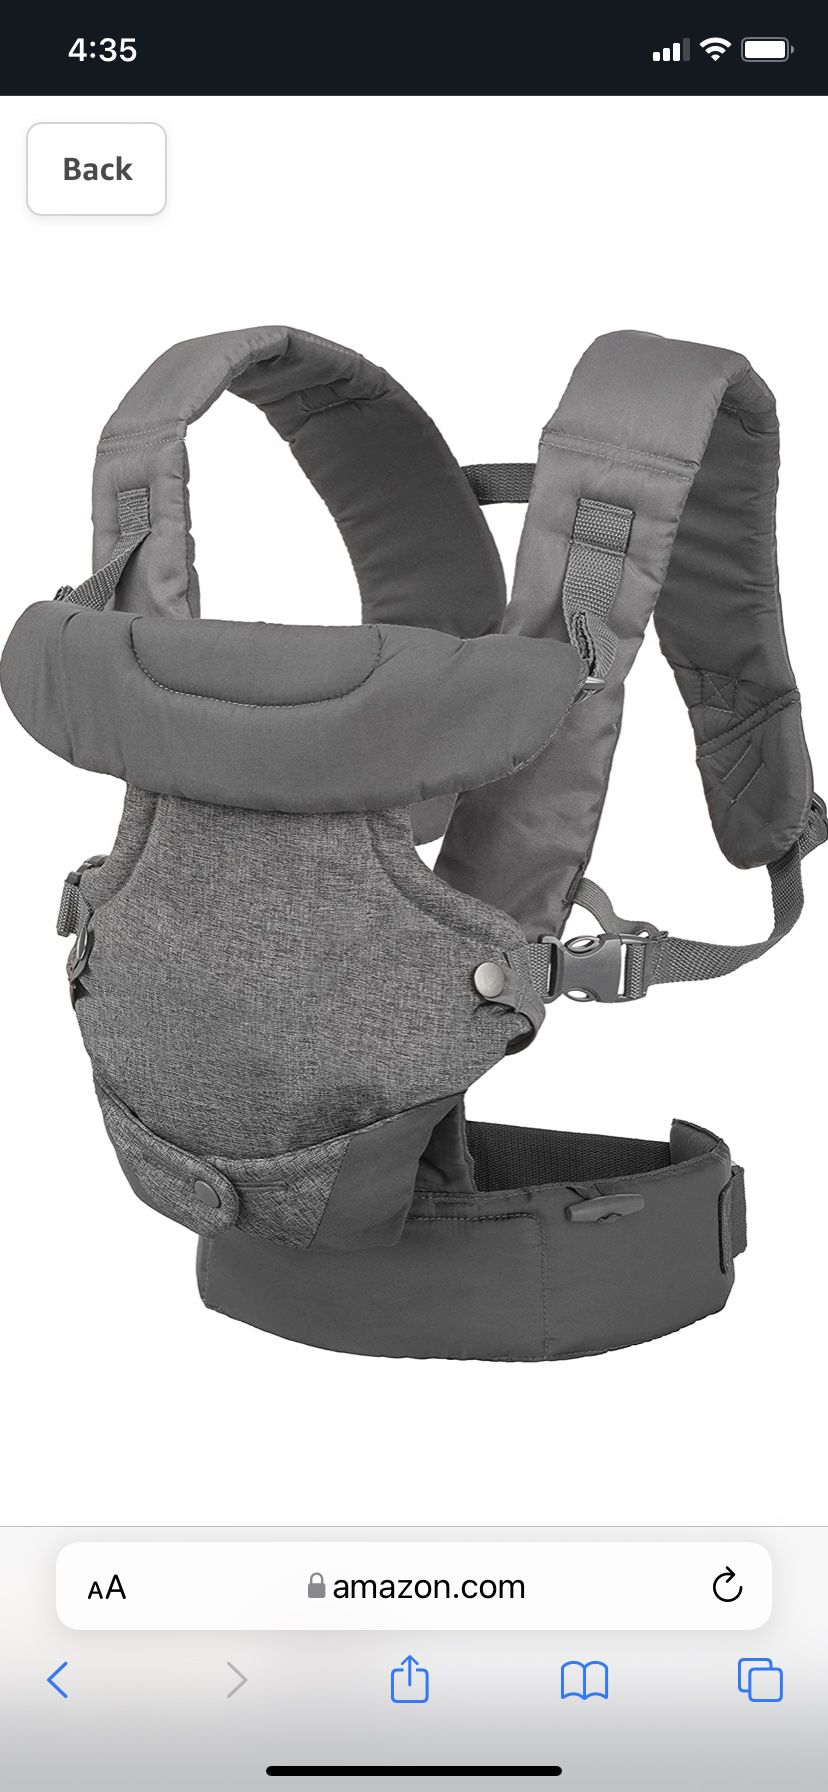 Infantino Flip Advanced 4-in-1 Carrier - Ergonomic, convertible, face-in and face-out front and back carry for newborns and older babies 8-32 lbs